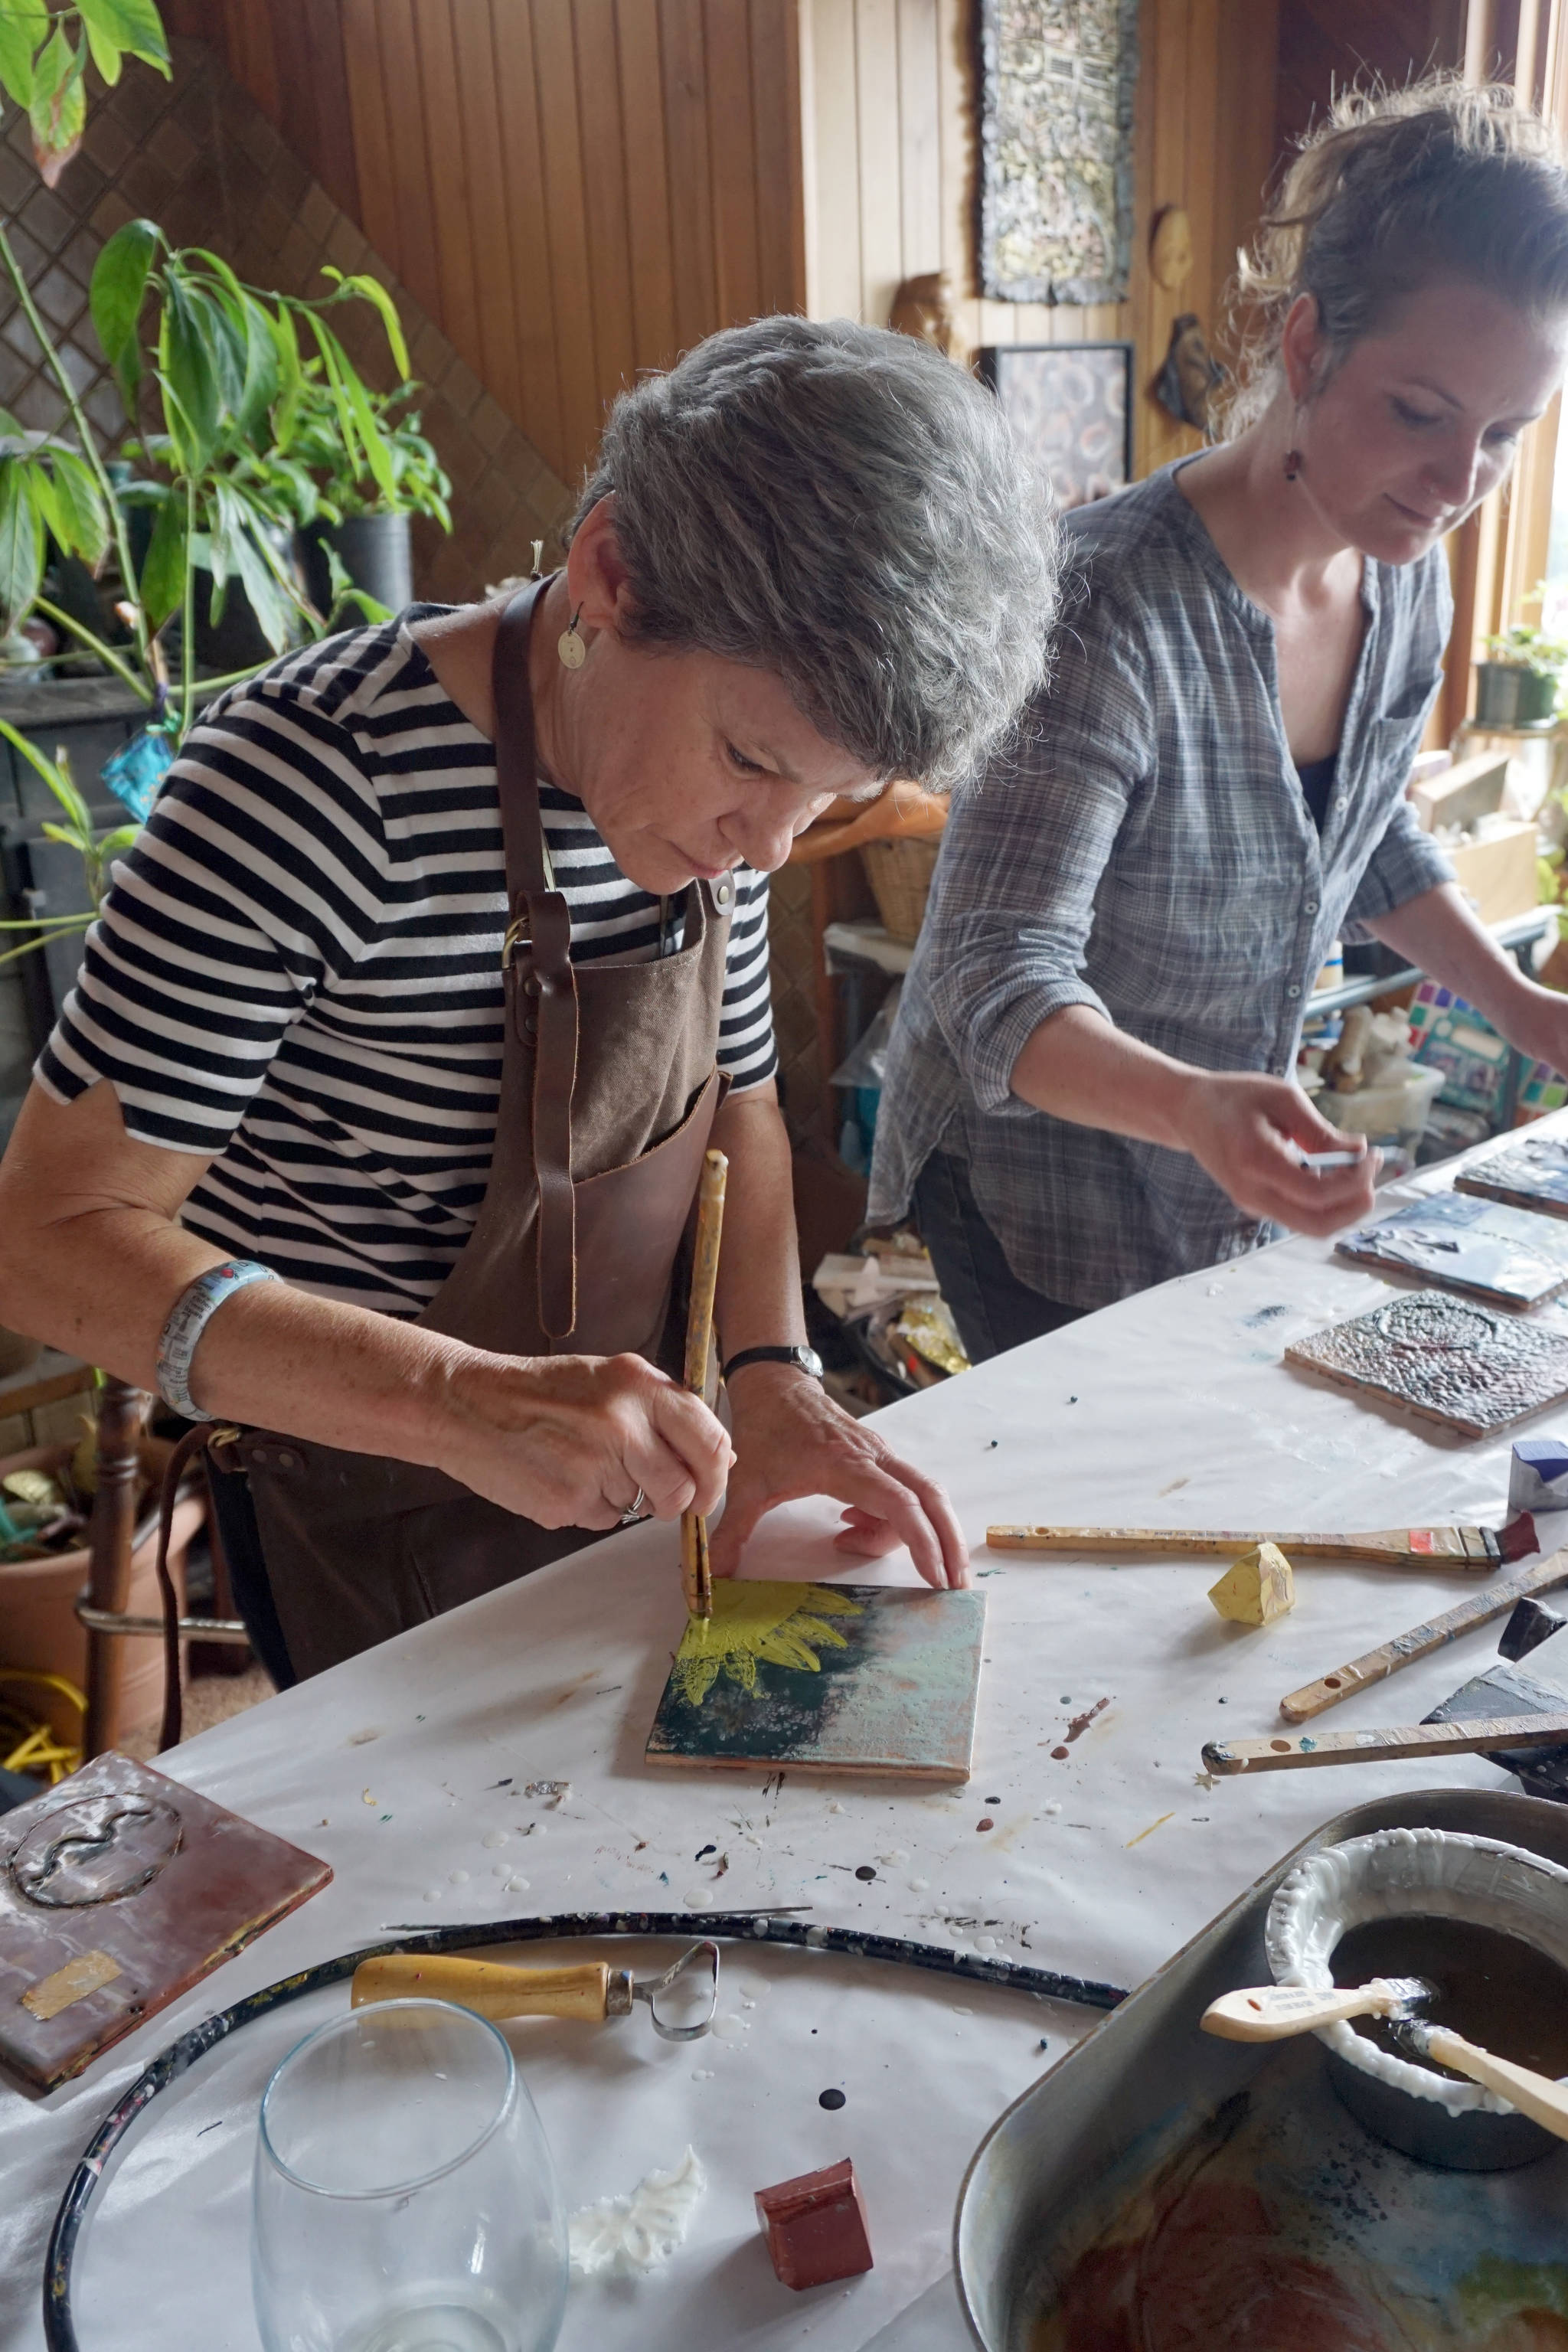 Jane Bernard of Morgan City, La., left, and Becca Bottebaum paint with encaustics in Ann-Margret Wimmerstedts Wax. Wine & Wimmerstedt class held July 30, 2017 at Wimmerstedt’s home. (Photo by Michael Armstrong/Homer News)